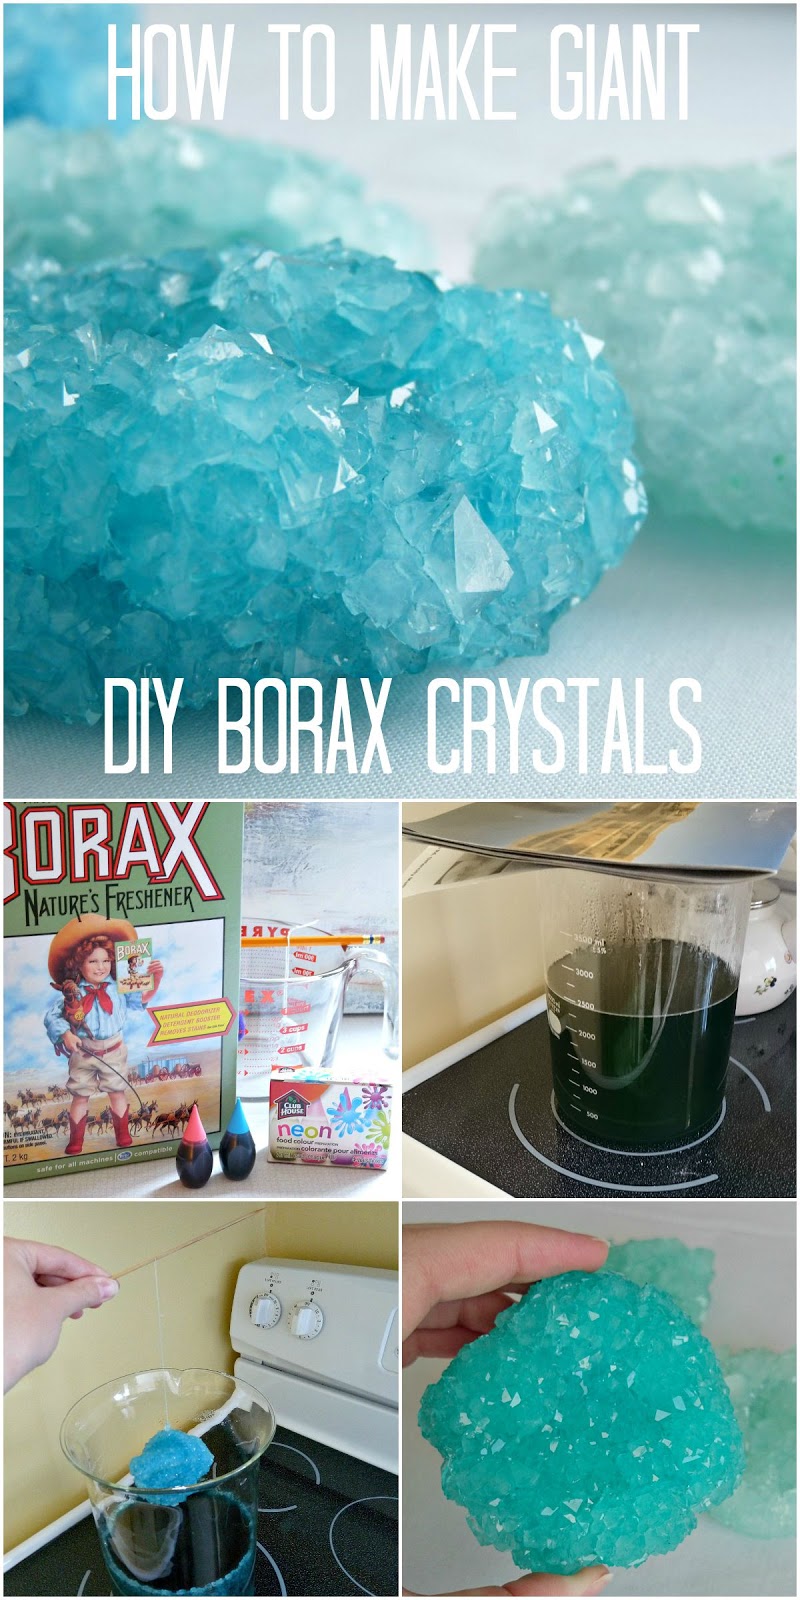 How to make giant borax crystals